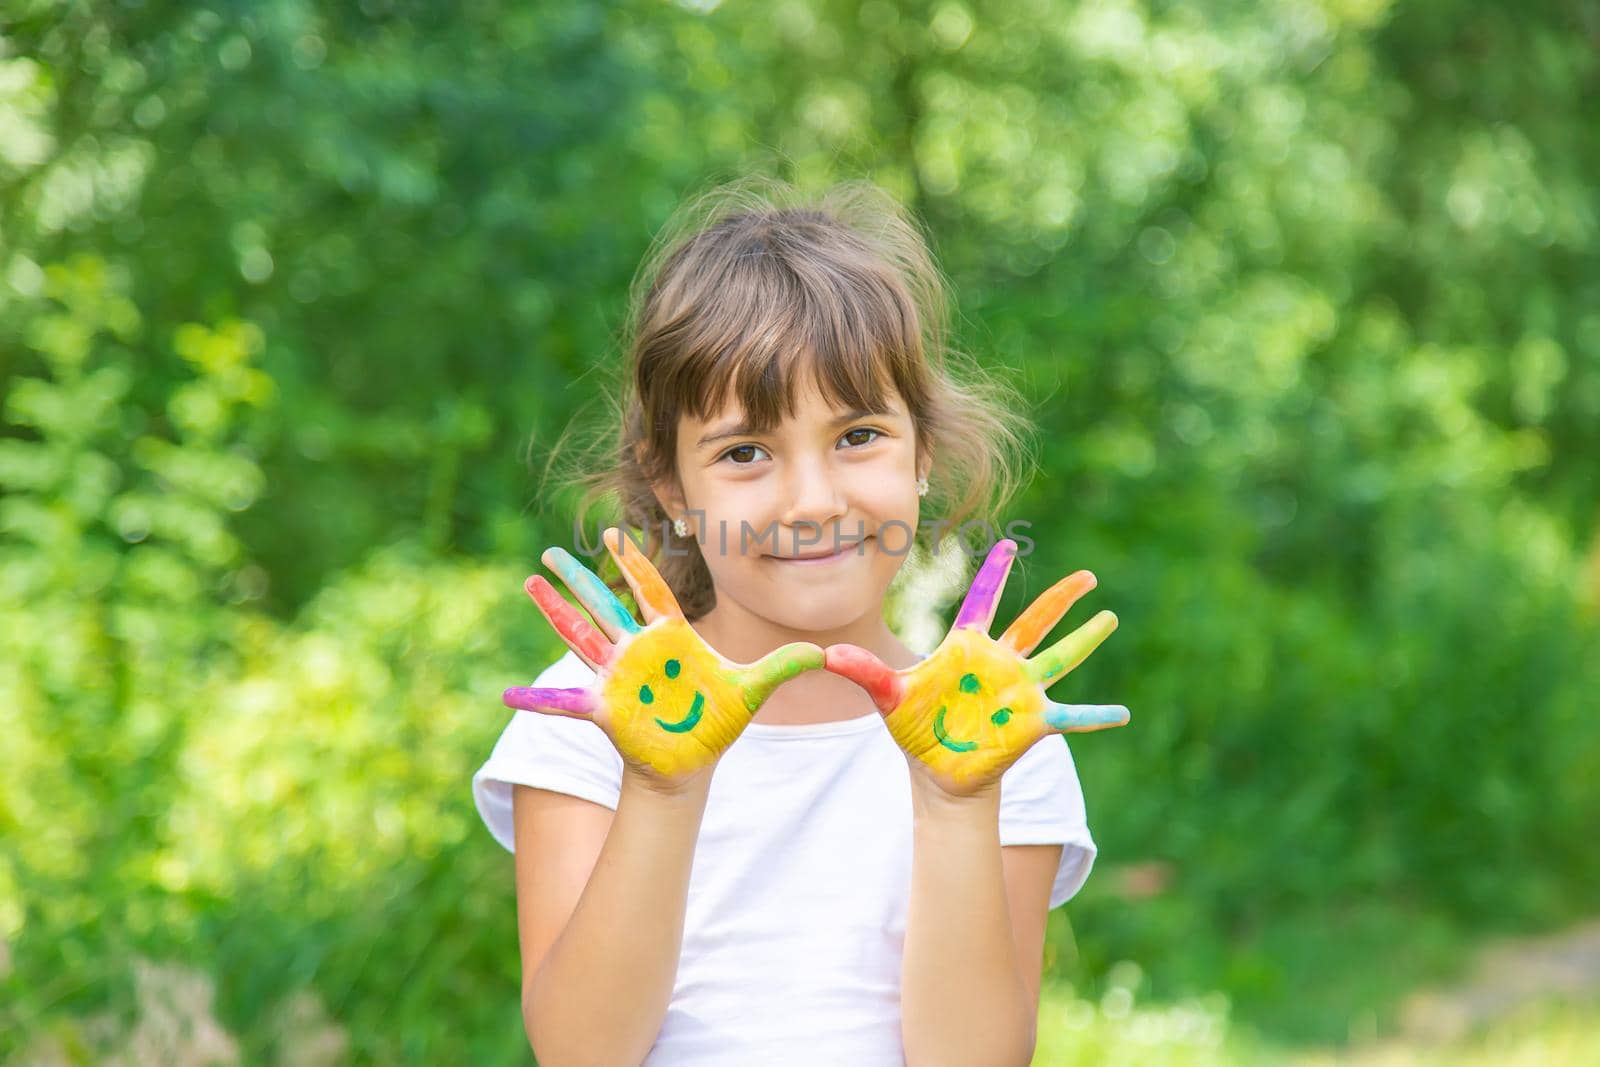 Child hands in paints a smile. Selective focus. by yanadjana